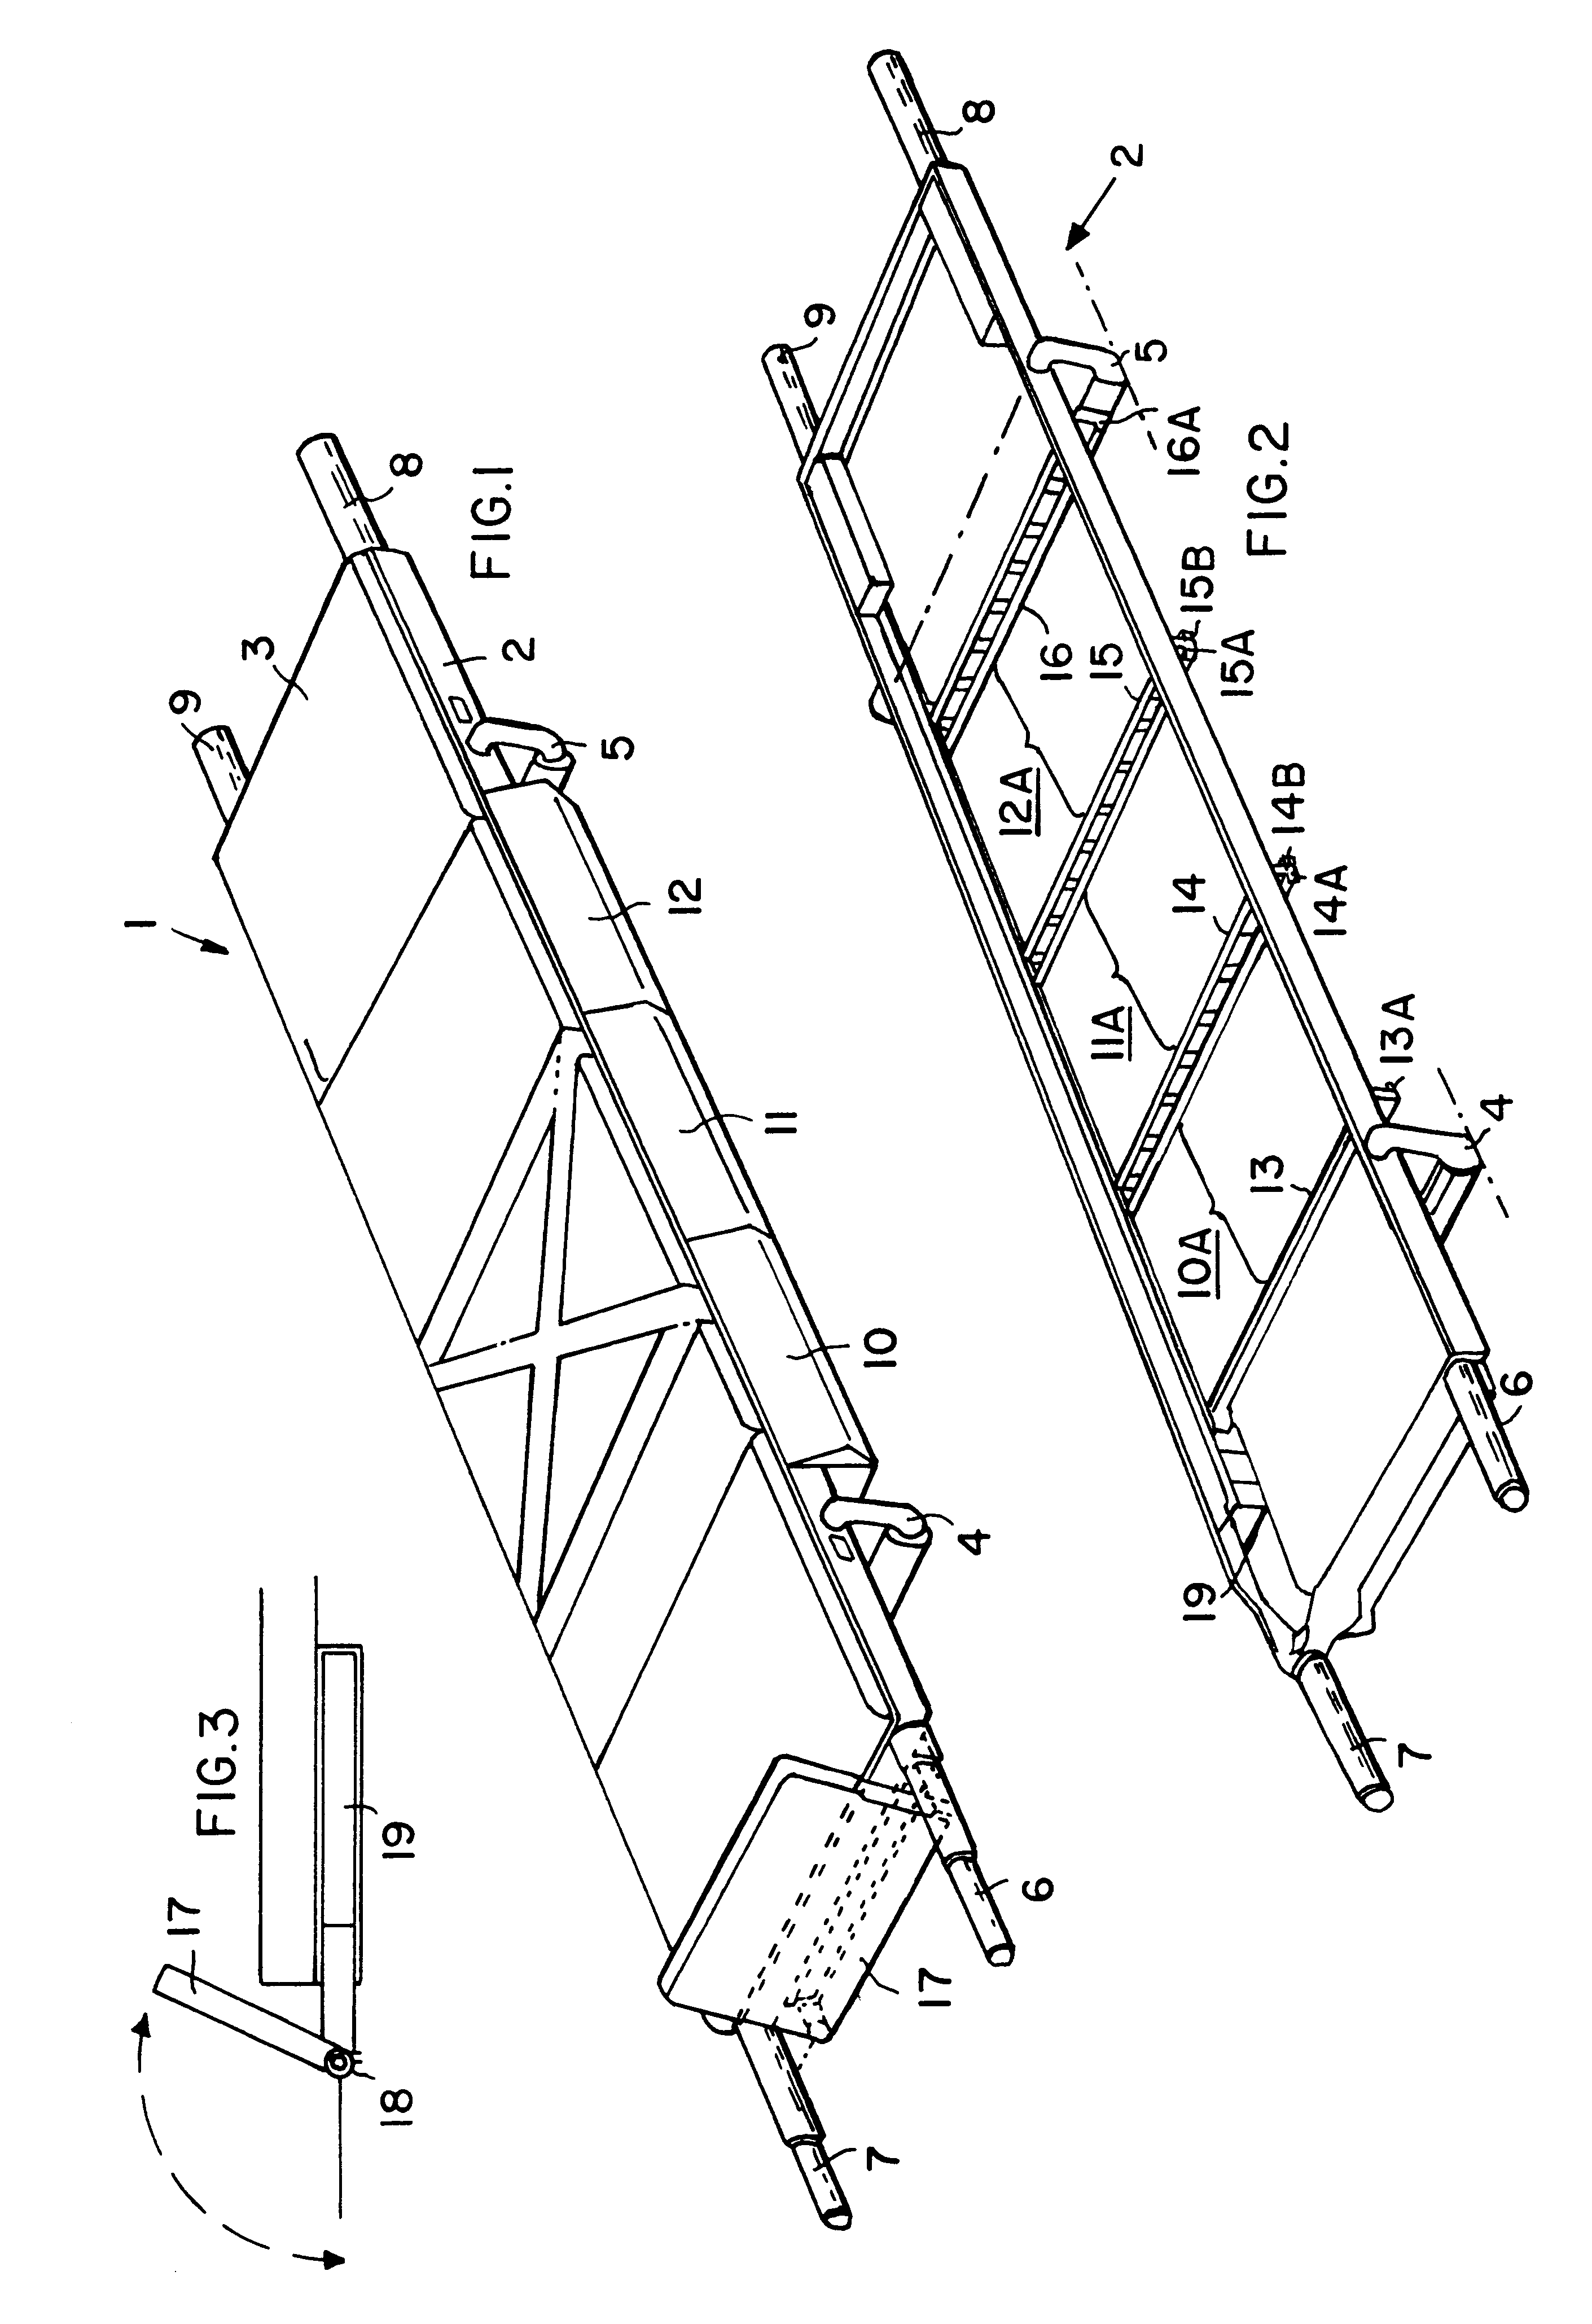 System for transporting a sick or injured person to a medical facility